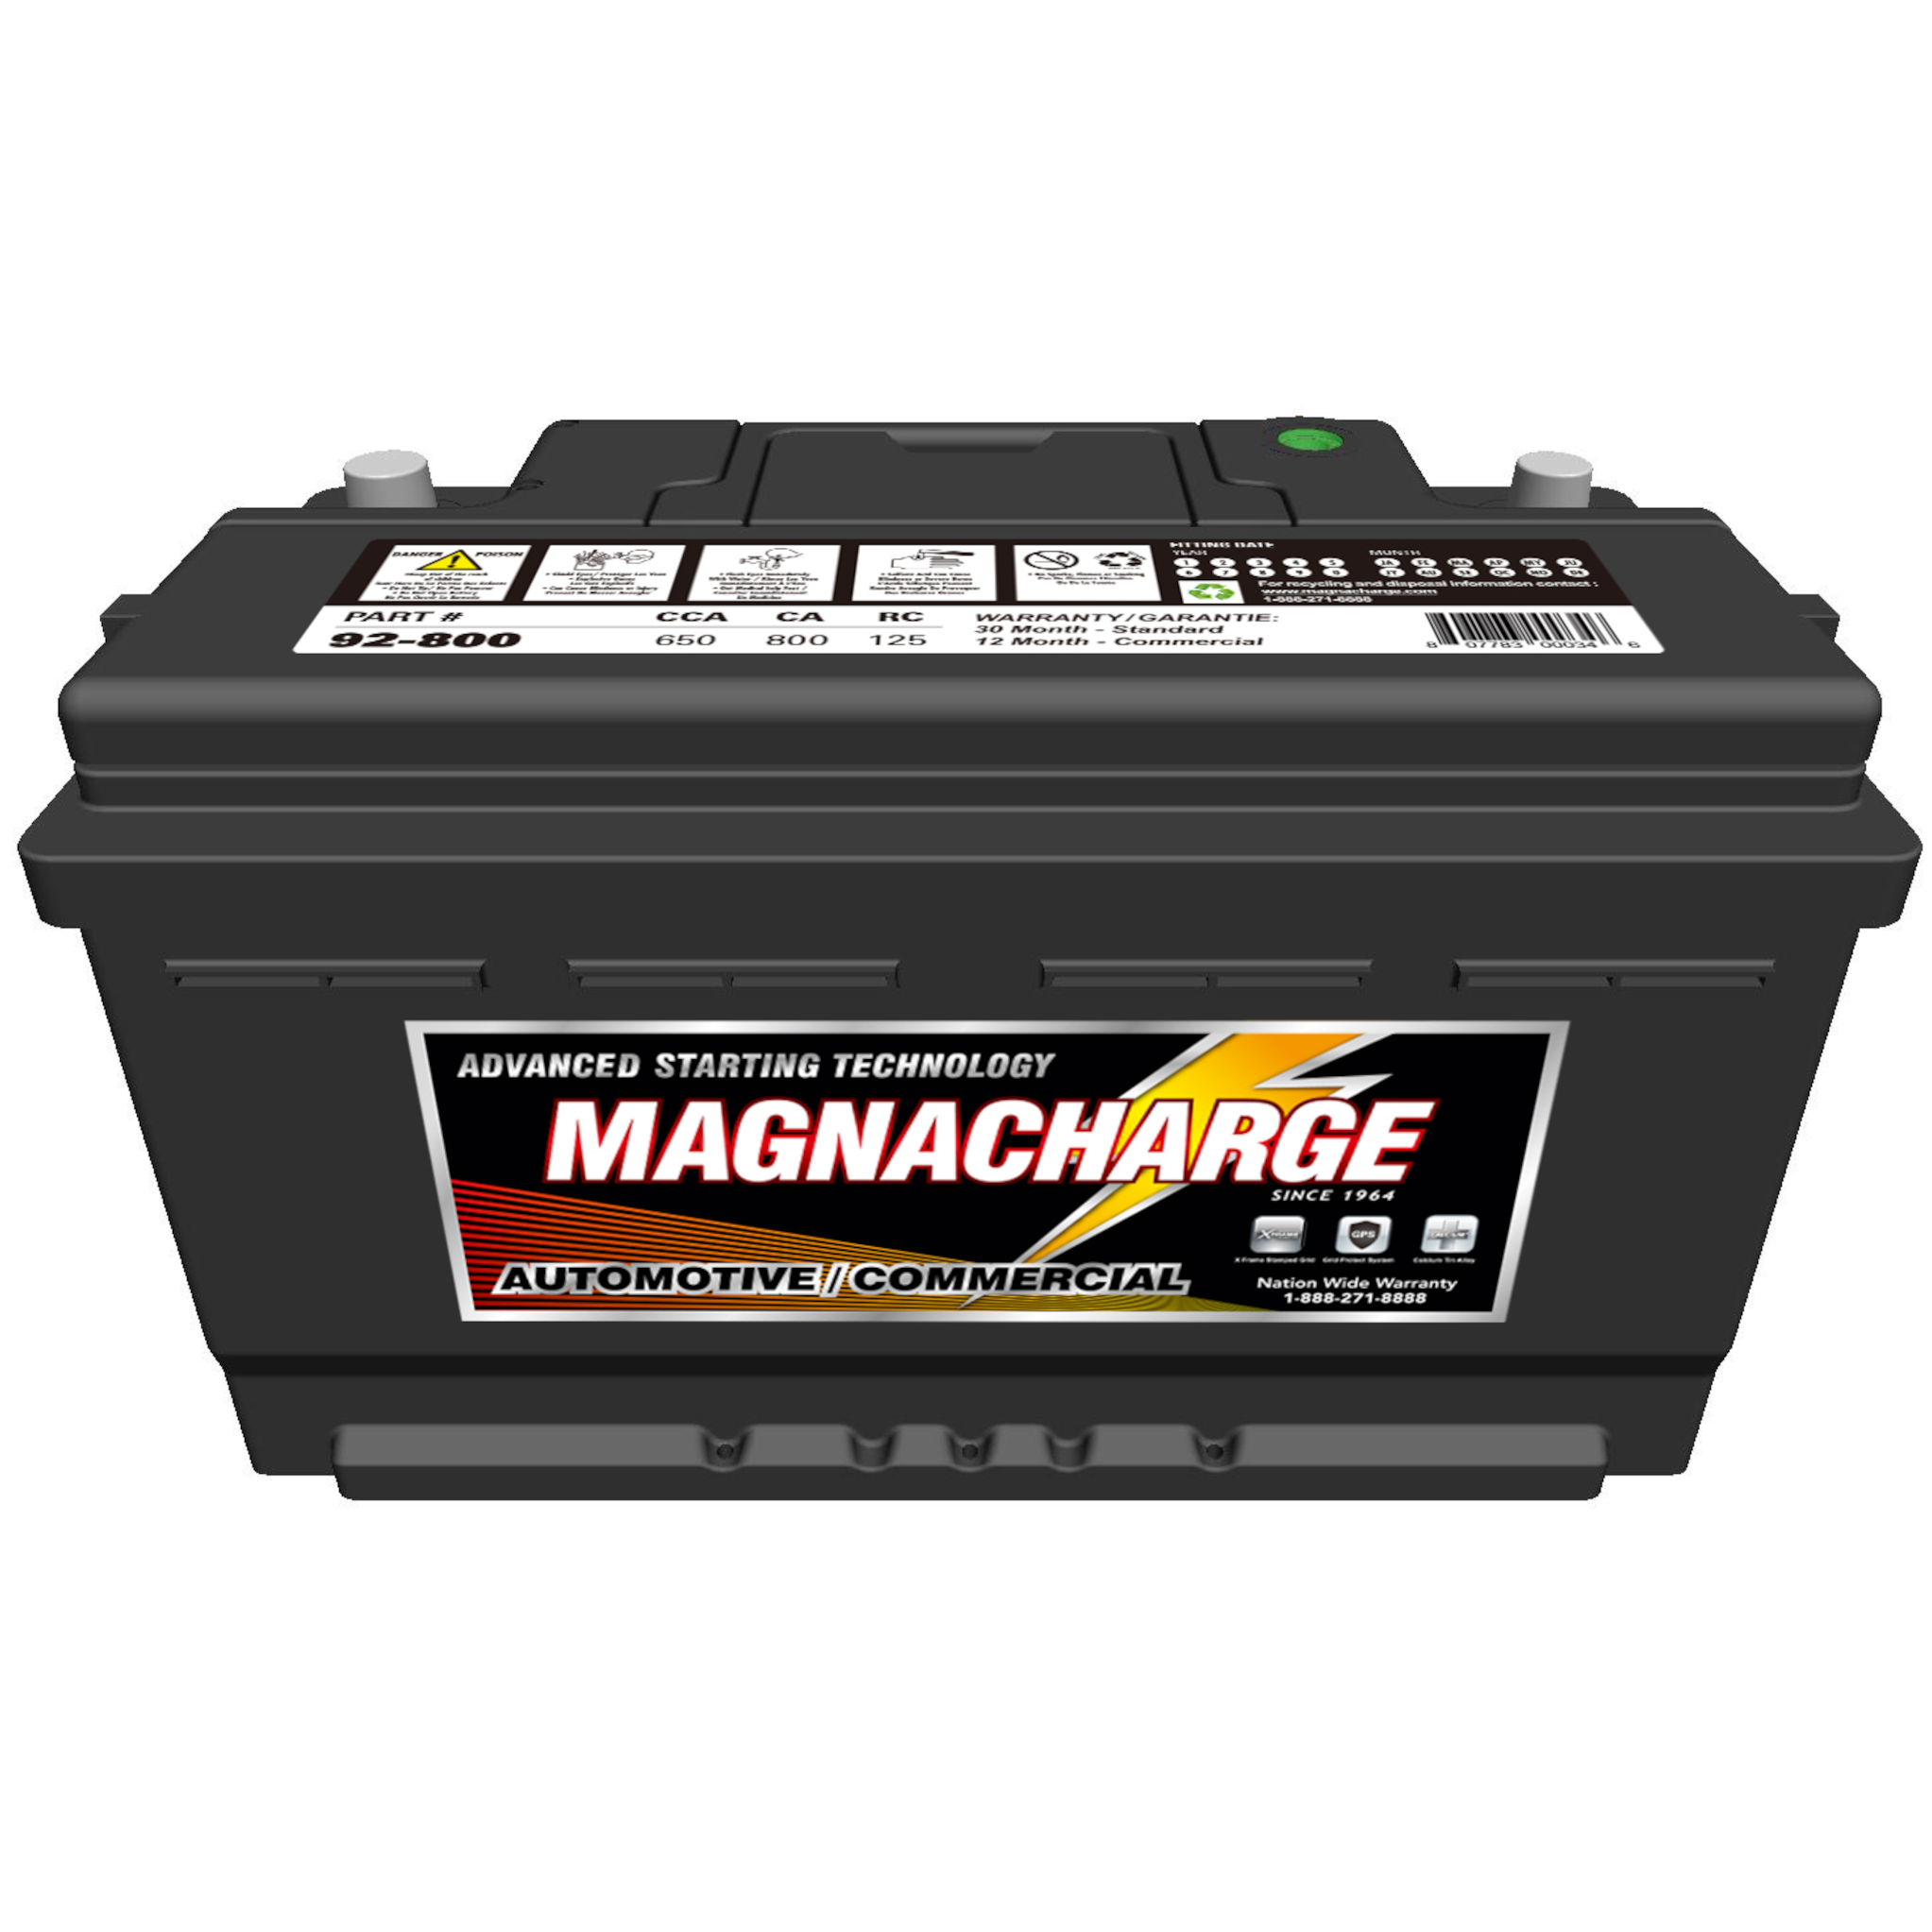 Magnacharge 92-800 Group 92 Car Battery